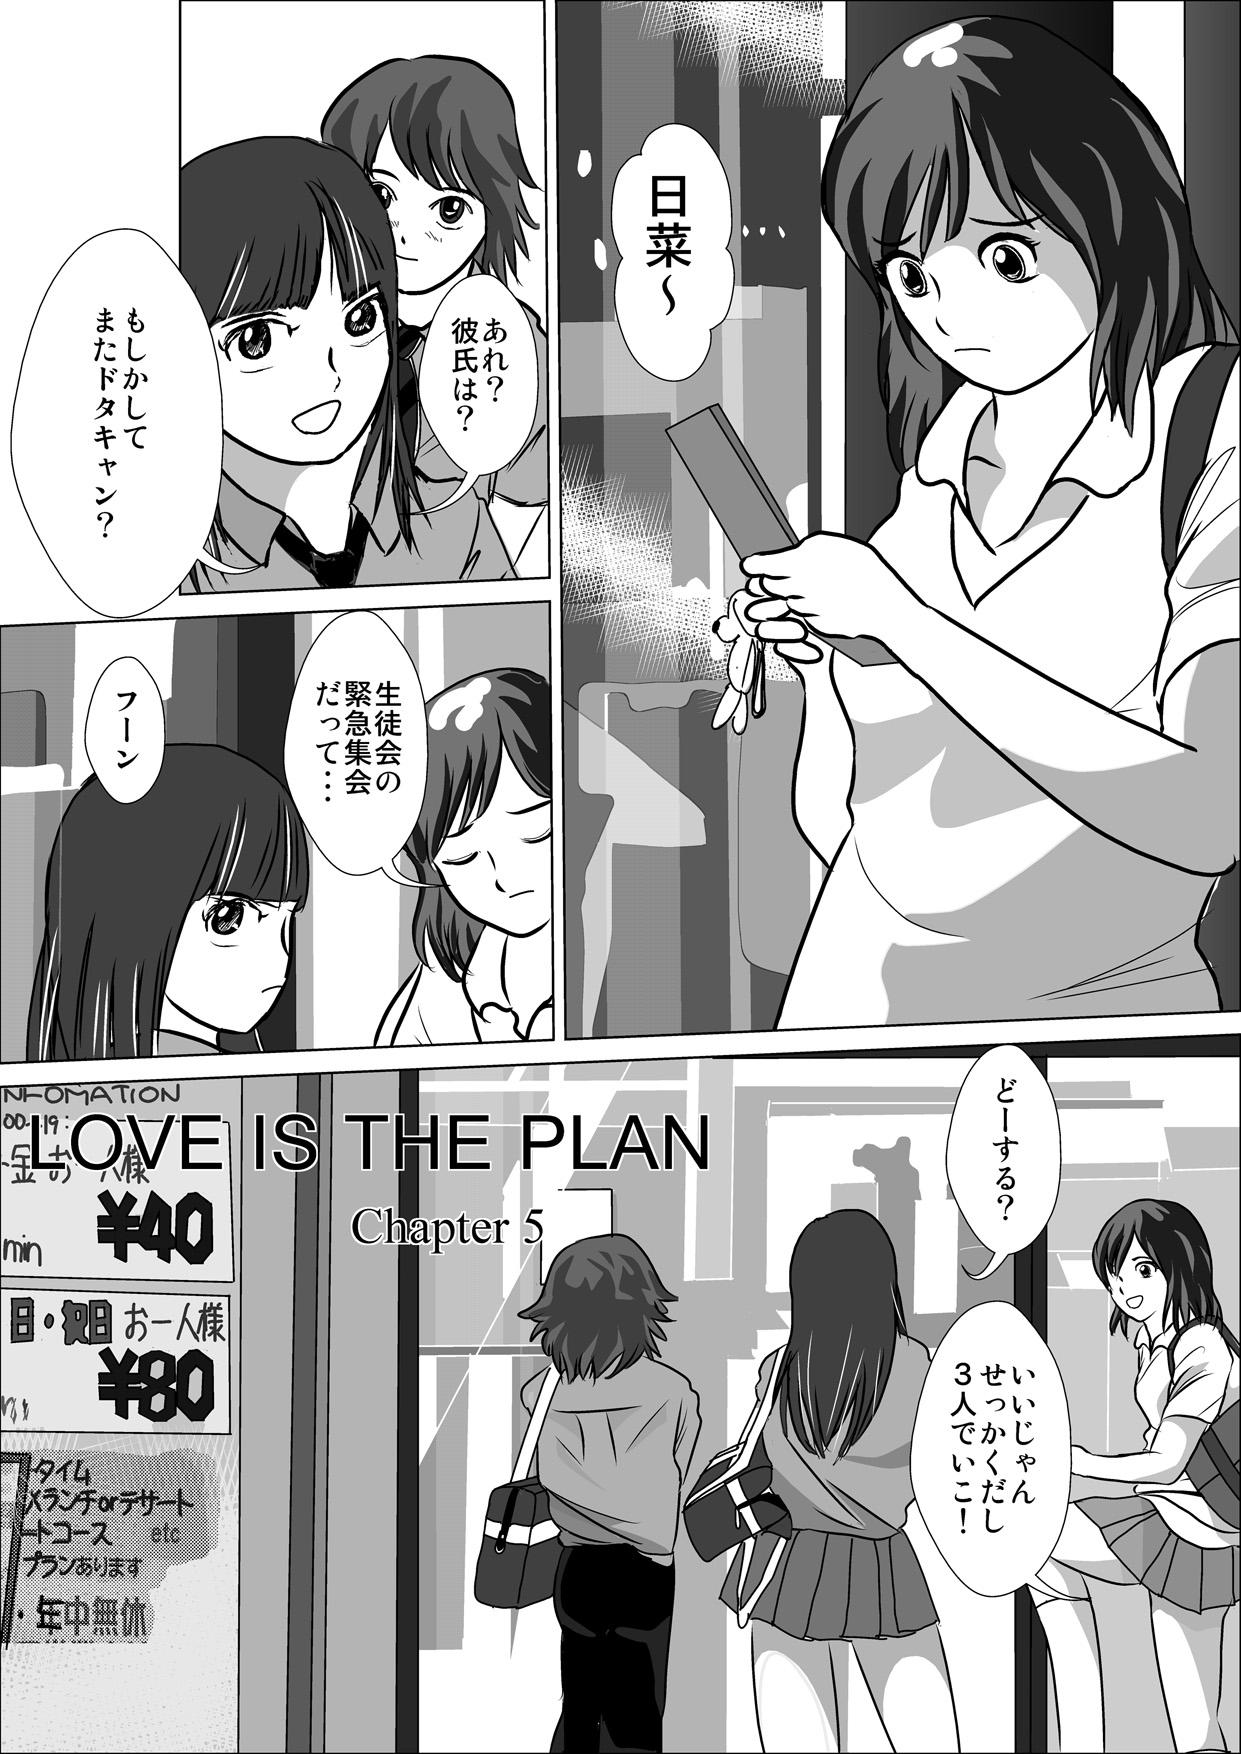 LOVE IS THE PLAN Chapter 5 11